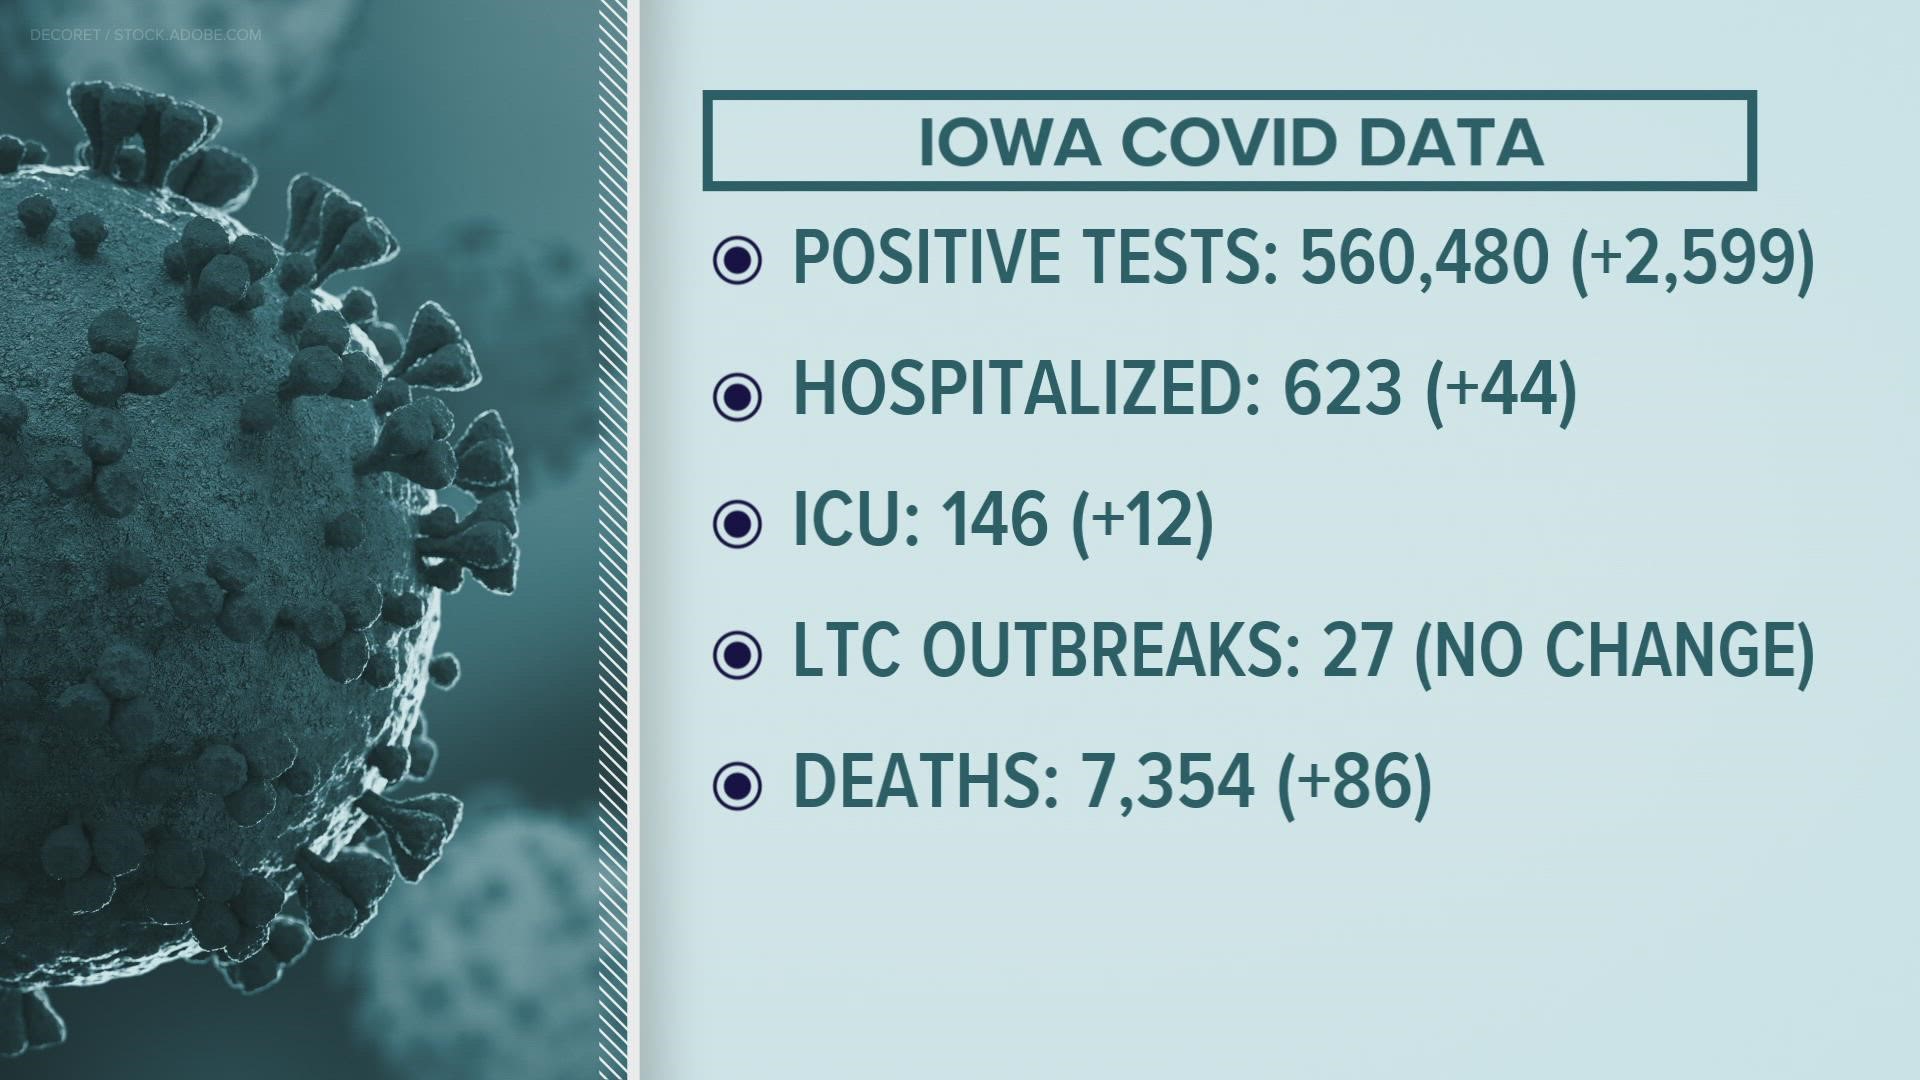 Text FACTS to 515-457-1026 for the latest Iowa COVID data.